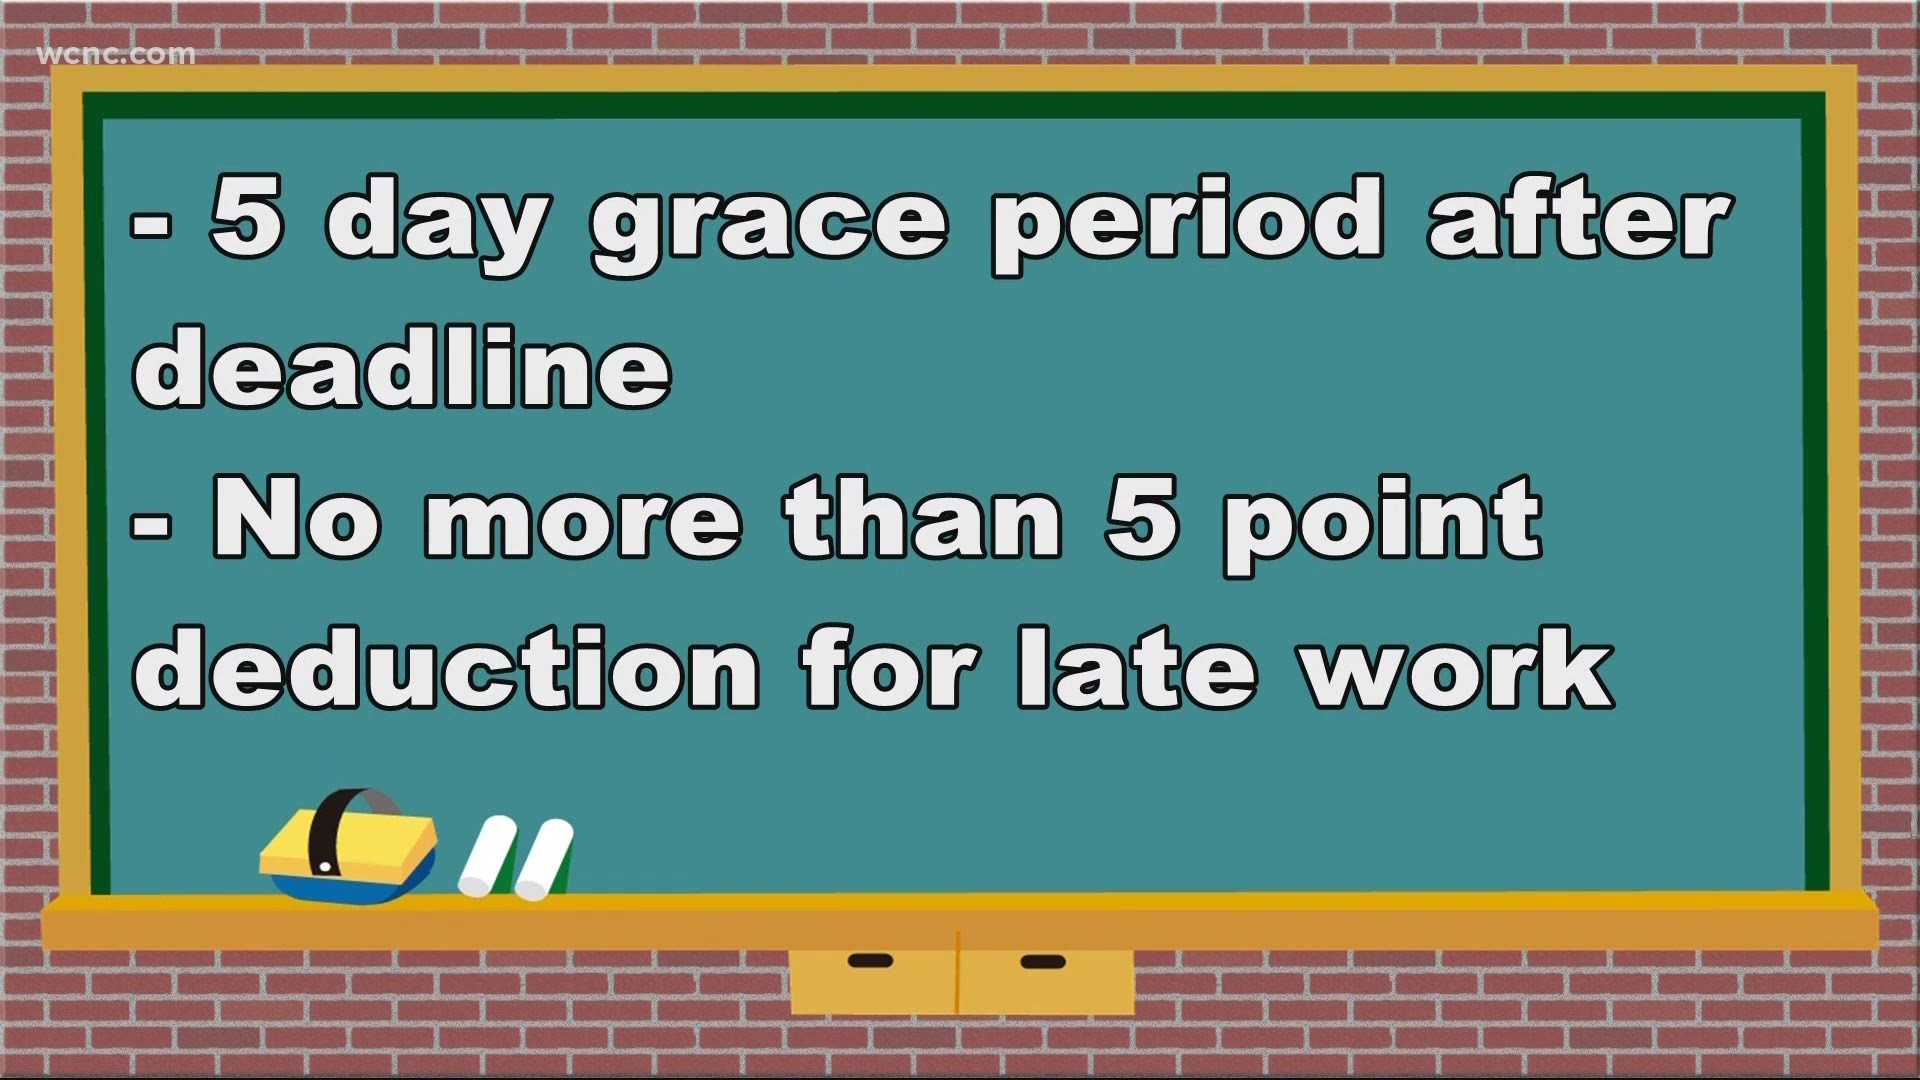 Teachers are telling WCNC Charlotte they are alarmed with new grading policy.